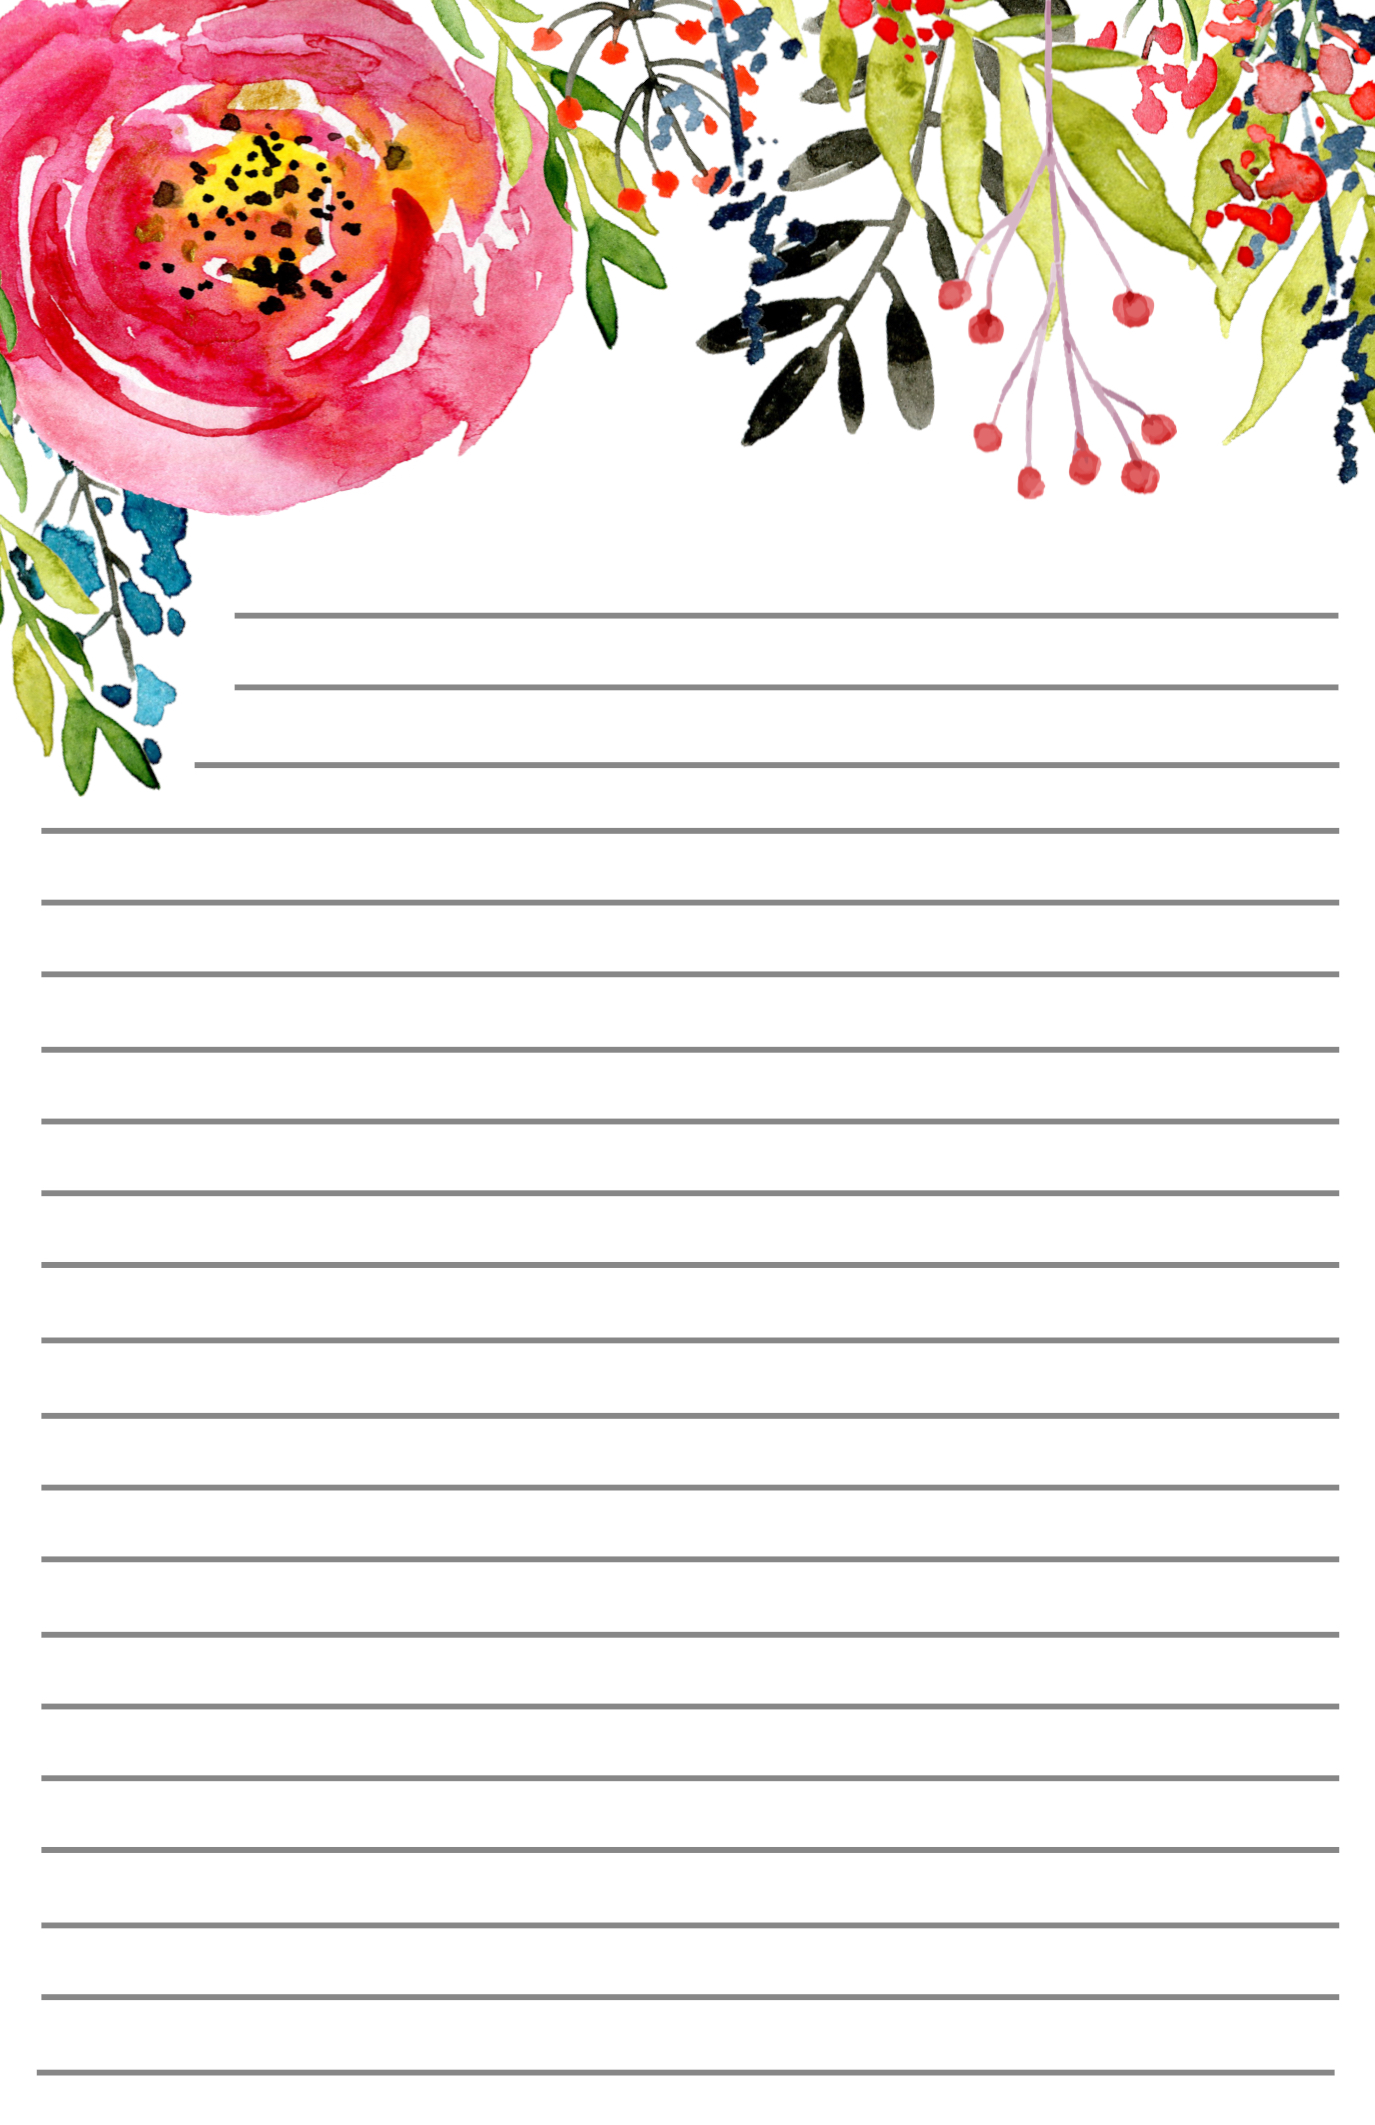 Free printable floral stationery